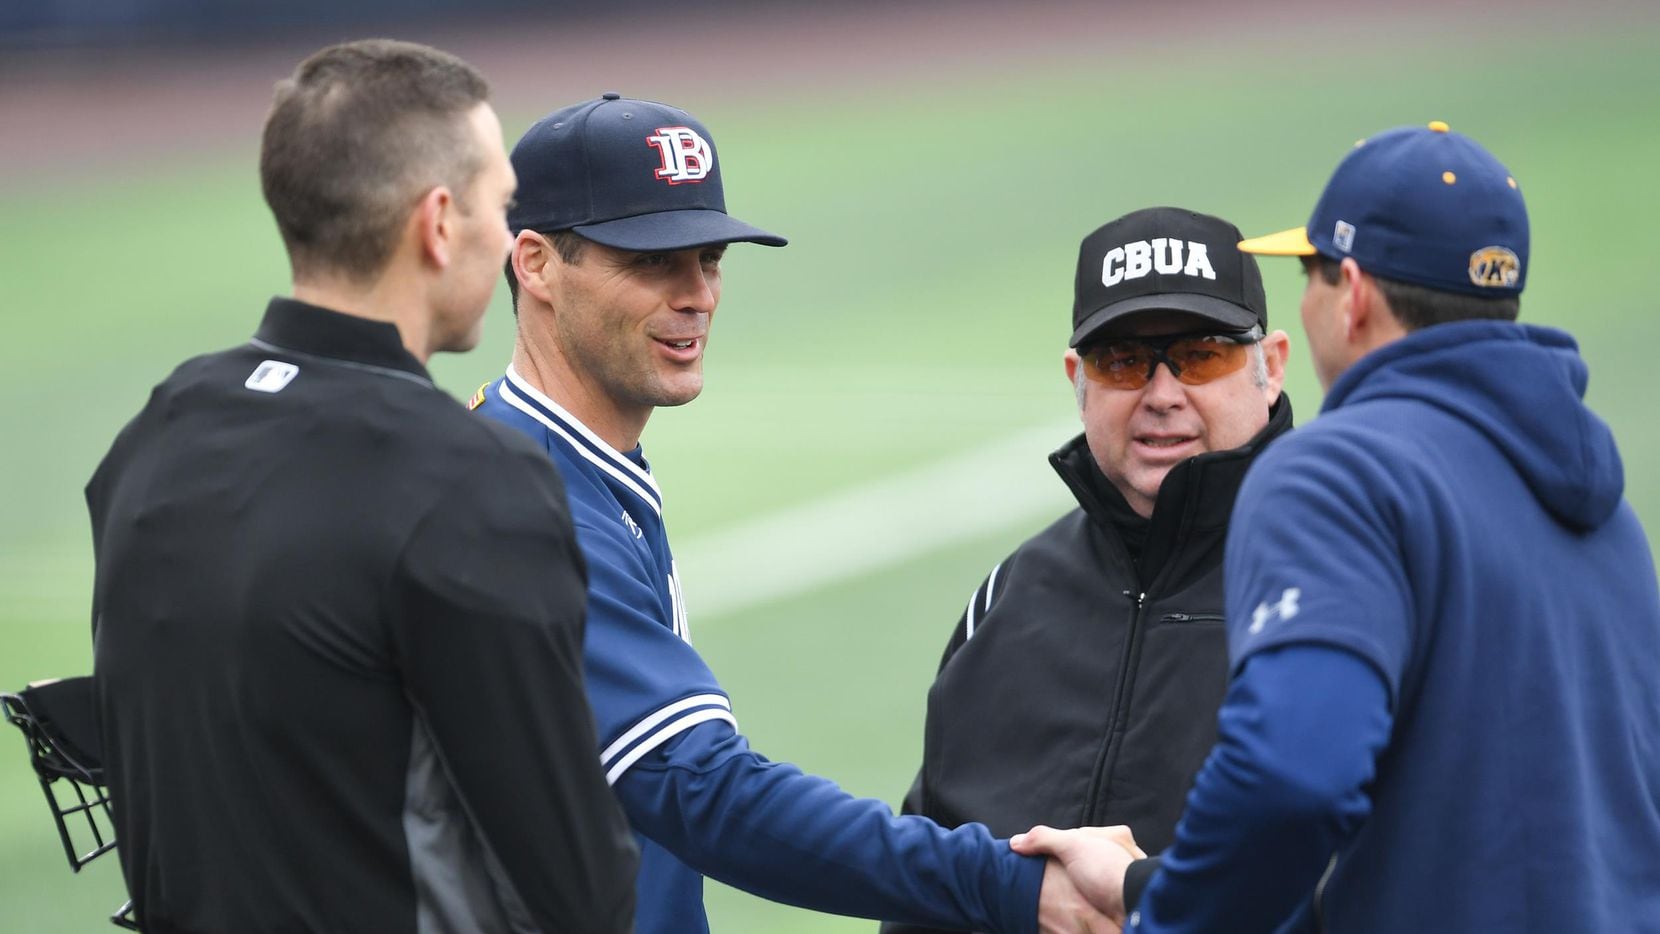 Dallas Baptist head coach Dan Heefner greets the opposing coach and umpires at home plate. The DBU season, along with the rest of college baseball, has been canceled this season due to concerns over the coronavirus. (Courtesy of DBU Athletics).